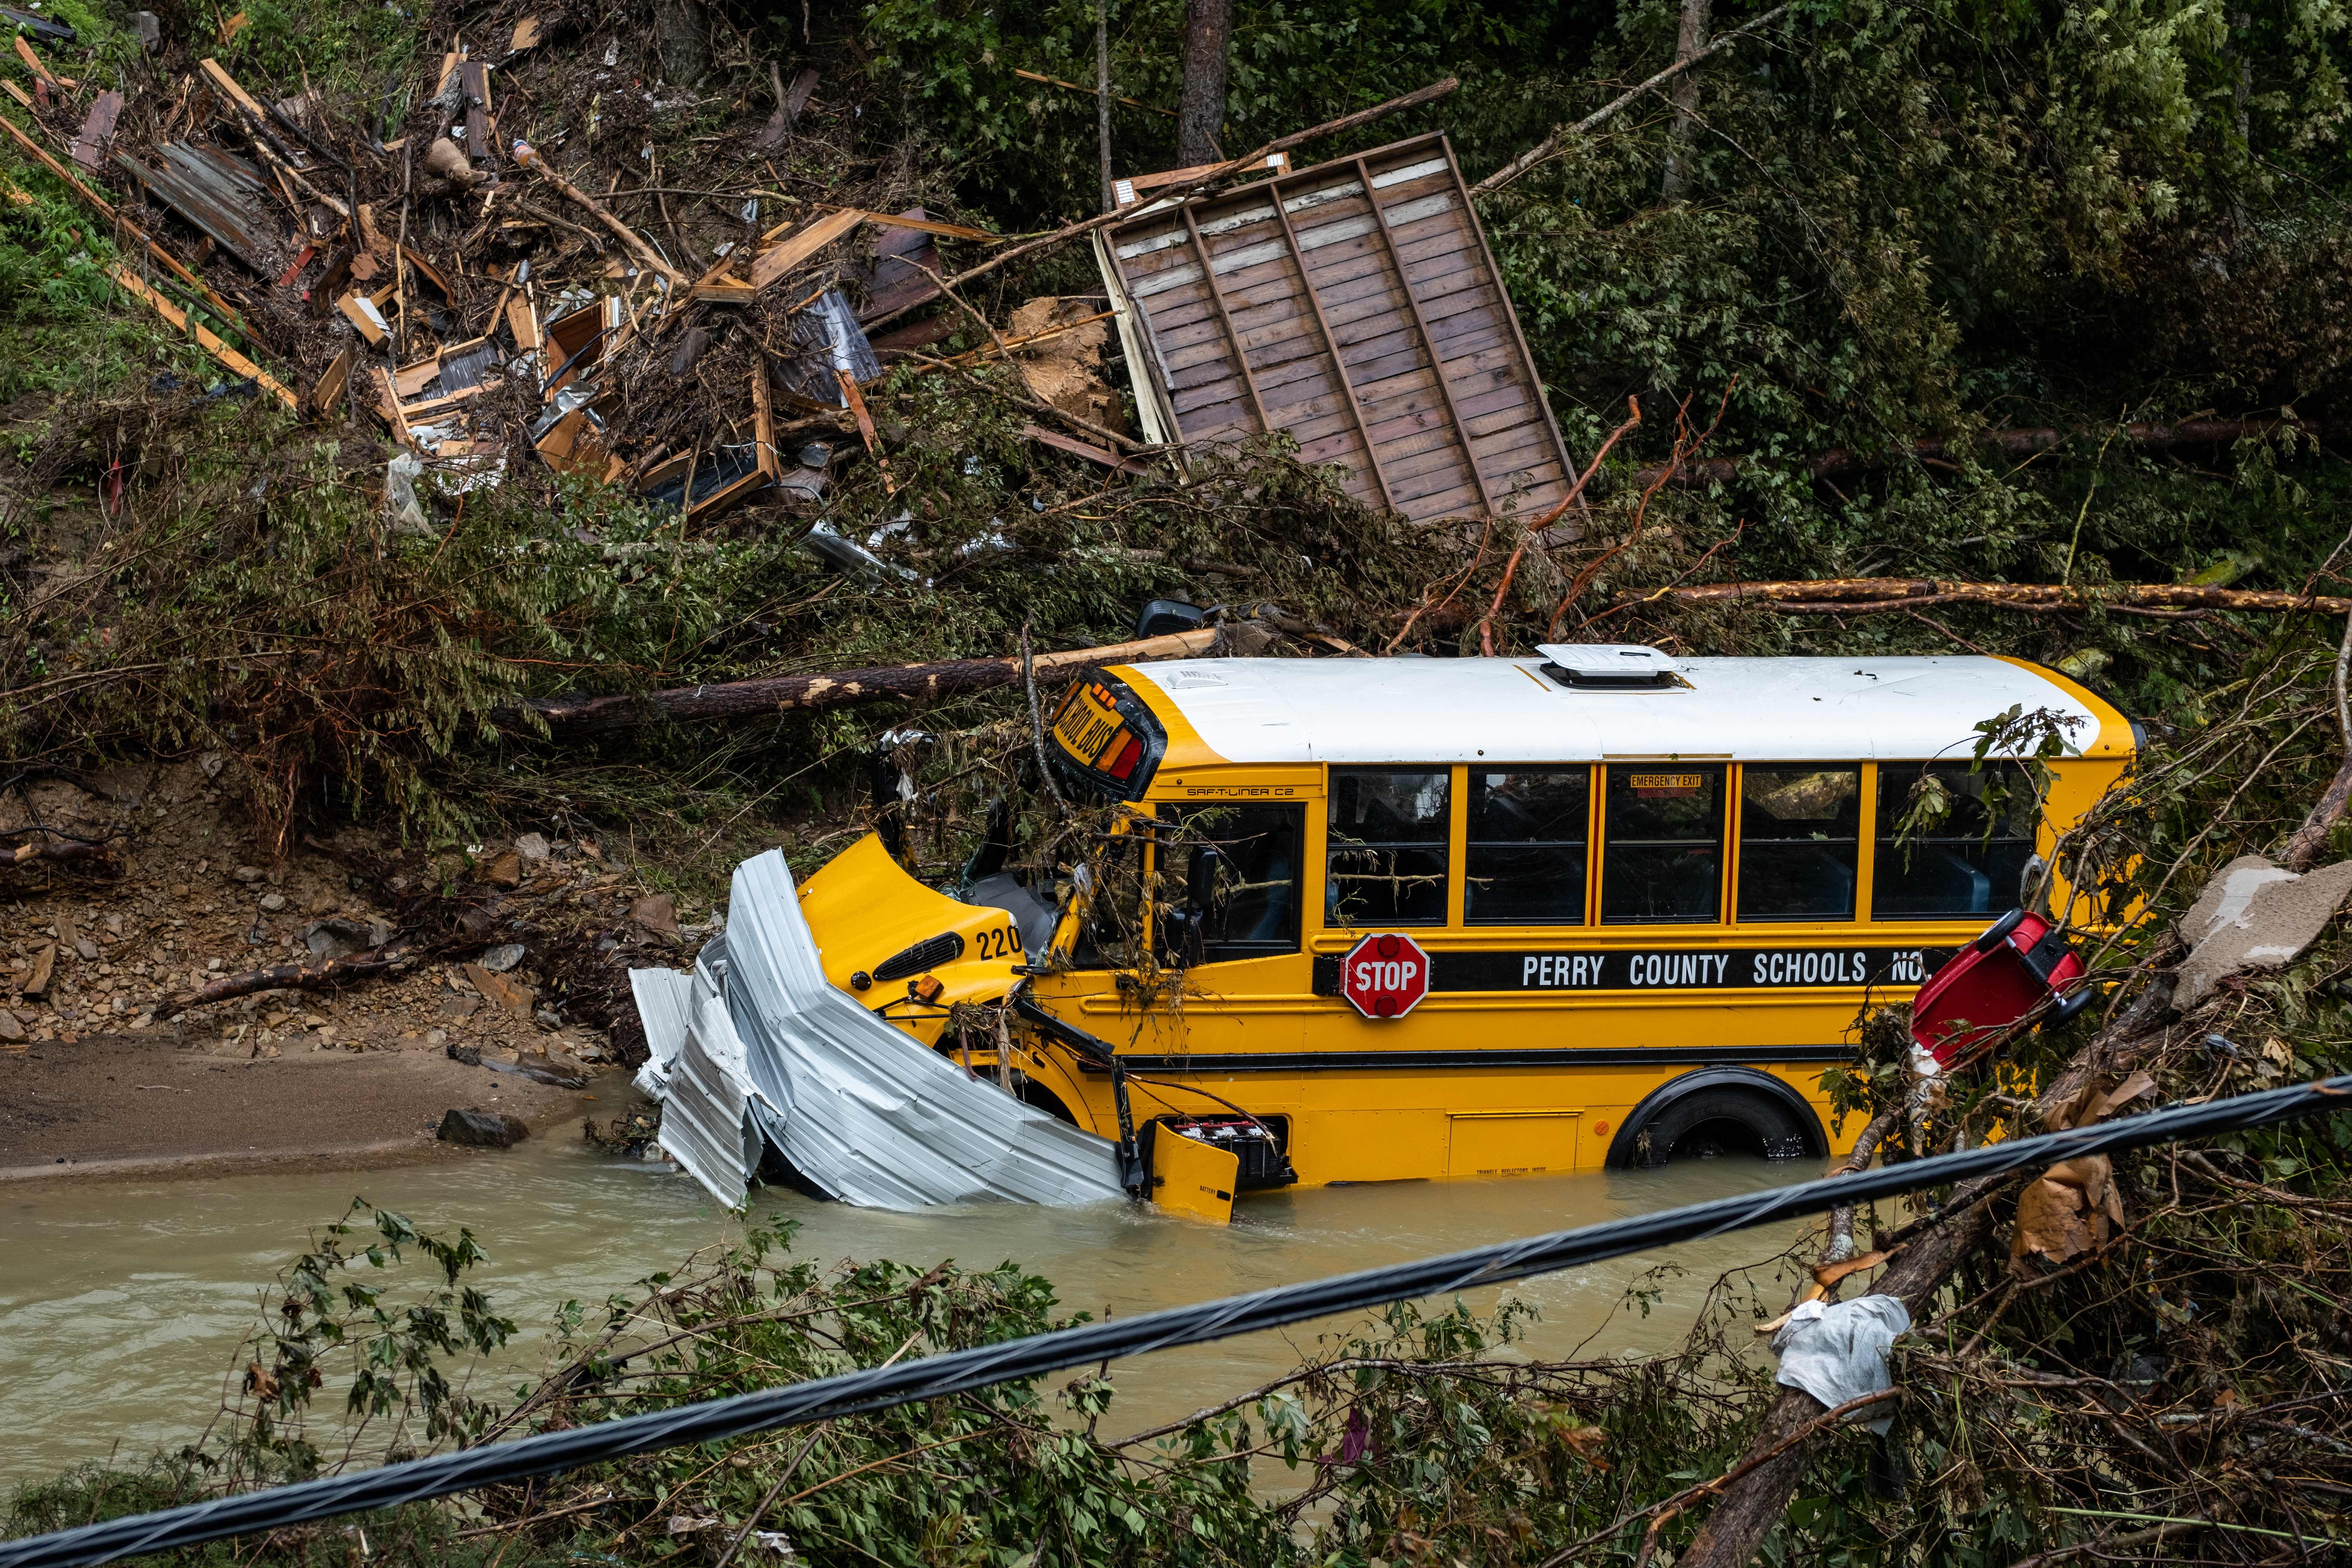 A Perry County school bus, along with other debris, sits in a creek near Jackson, Kentucky, on July 31, 2022. (Photo: Seth Herald / AFP, Getty Images)